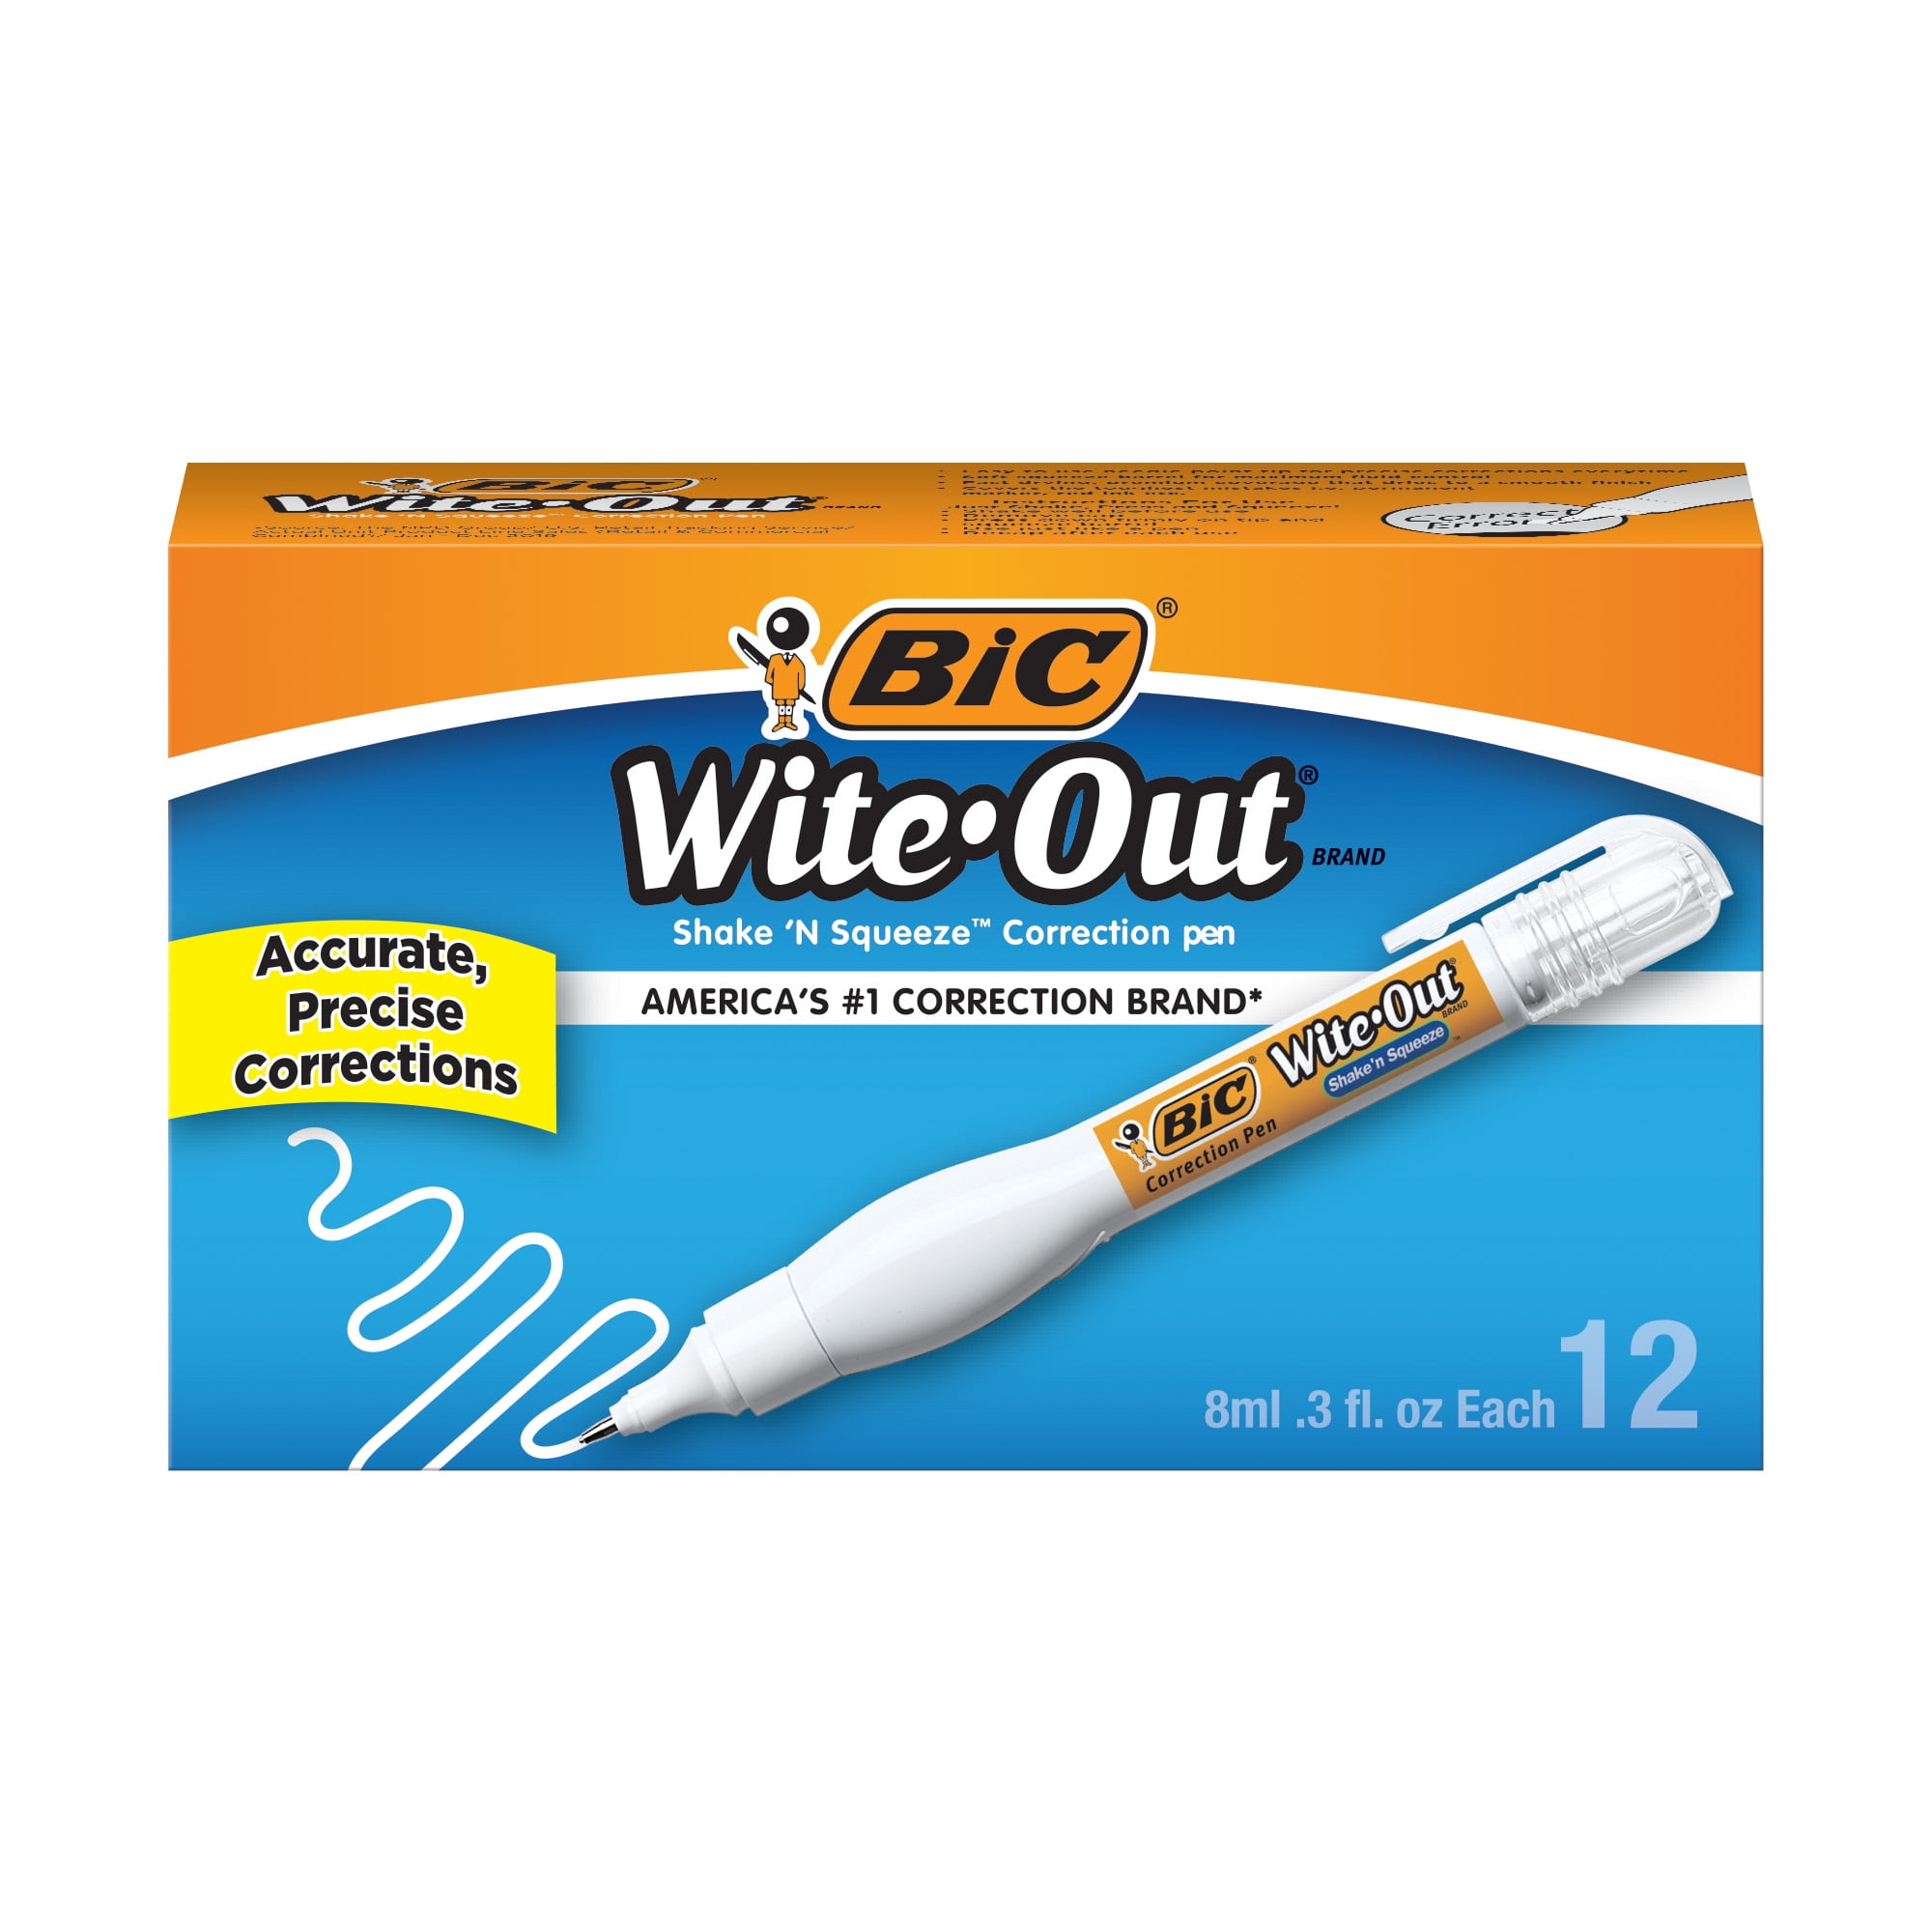 Whiteout pen hi-res stock photography and images - Alamy